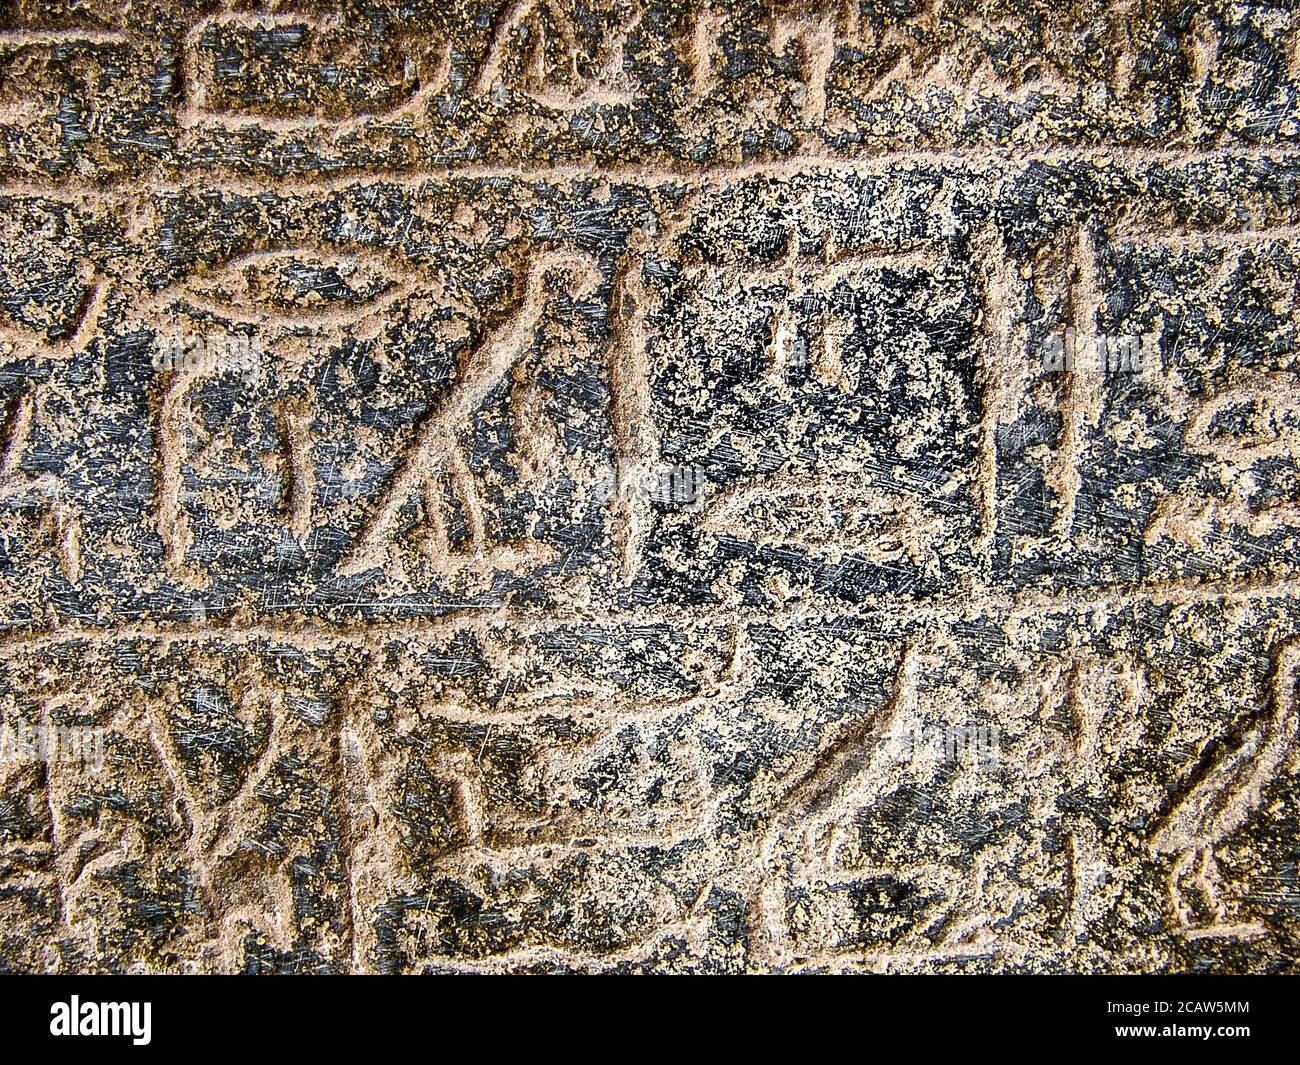 Egypt, Luxor, temple of Merenptah, cast of the stele of Merenptah : The first mention of Israel. Stock Photo